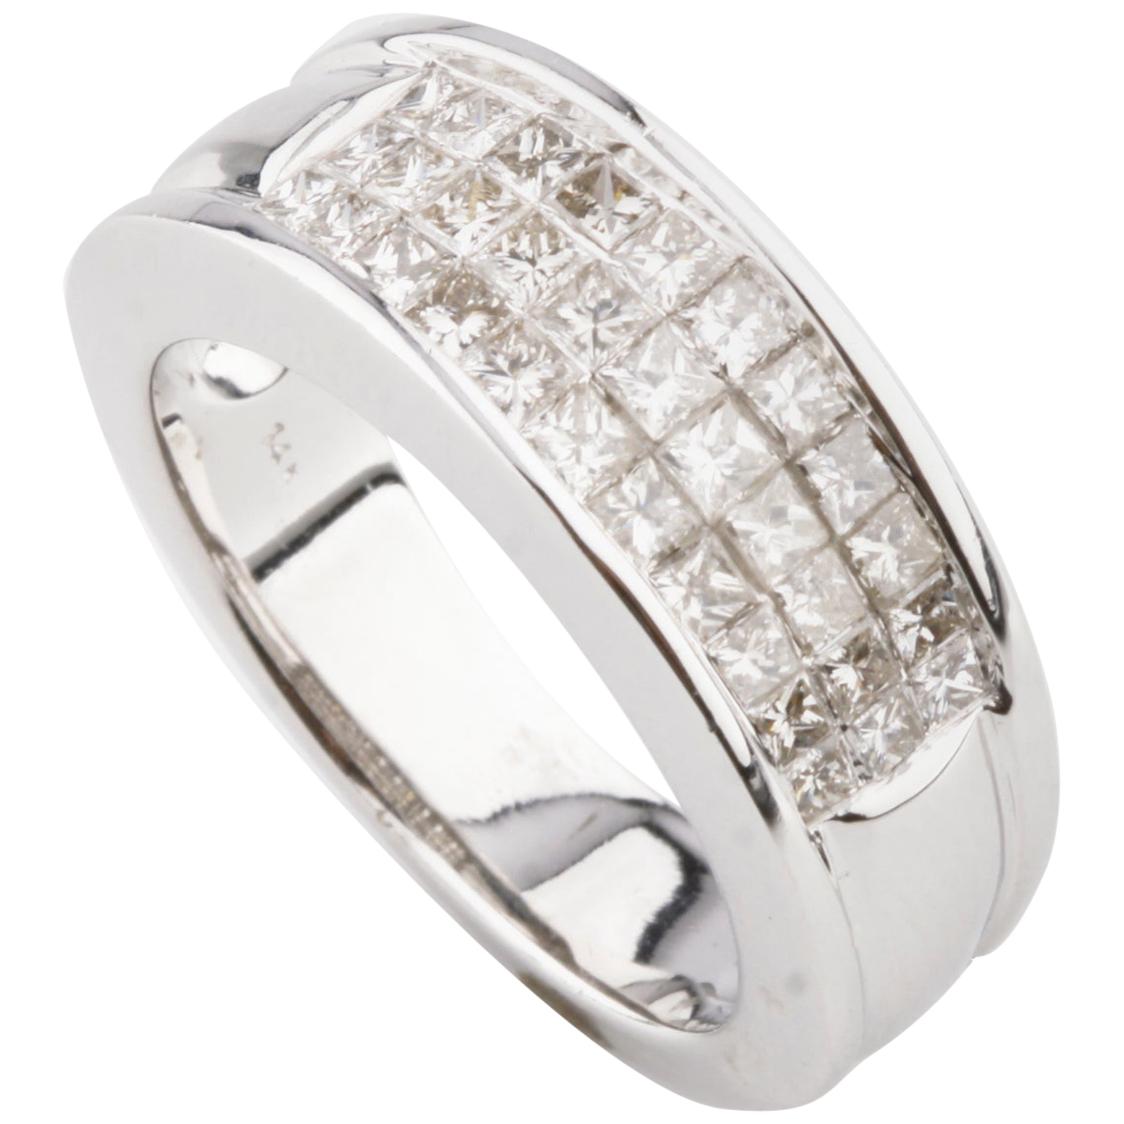 1.0 Carat Princess Diamond Plaque Band Ring in White Gold